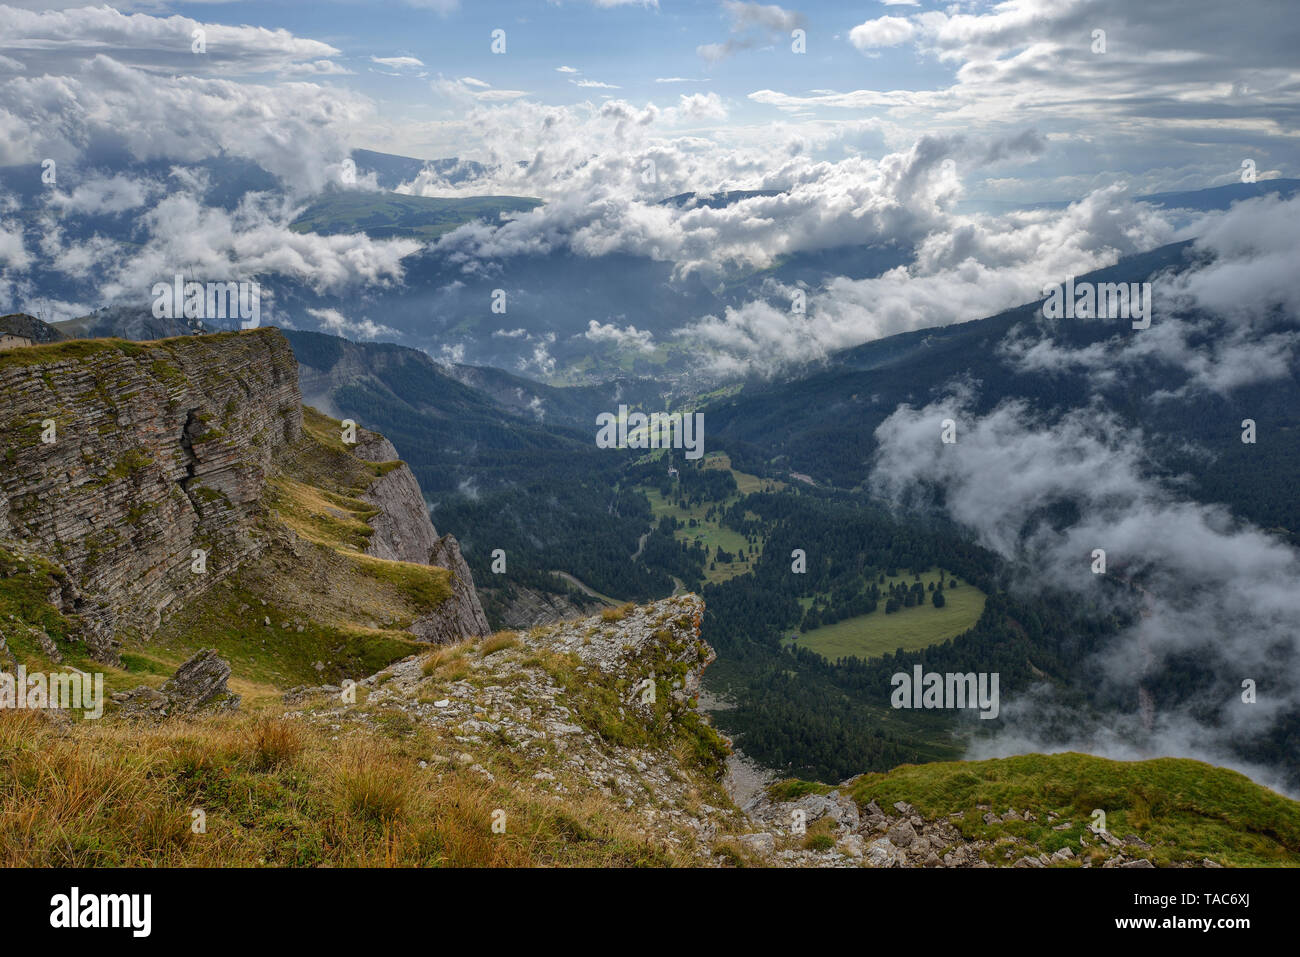 Italy, Dolomites, Sout Tyrol, View from the mountain Seceda over Val Gardena with dramatic clouds over mountains Stock Photo